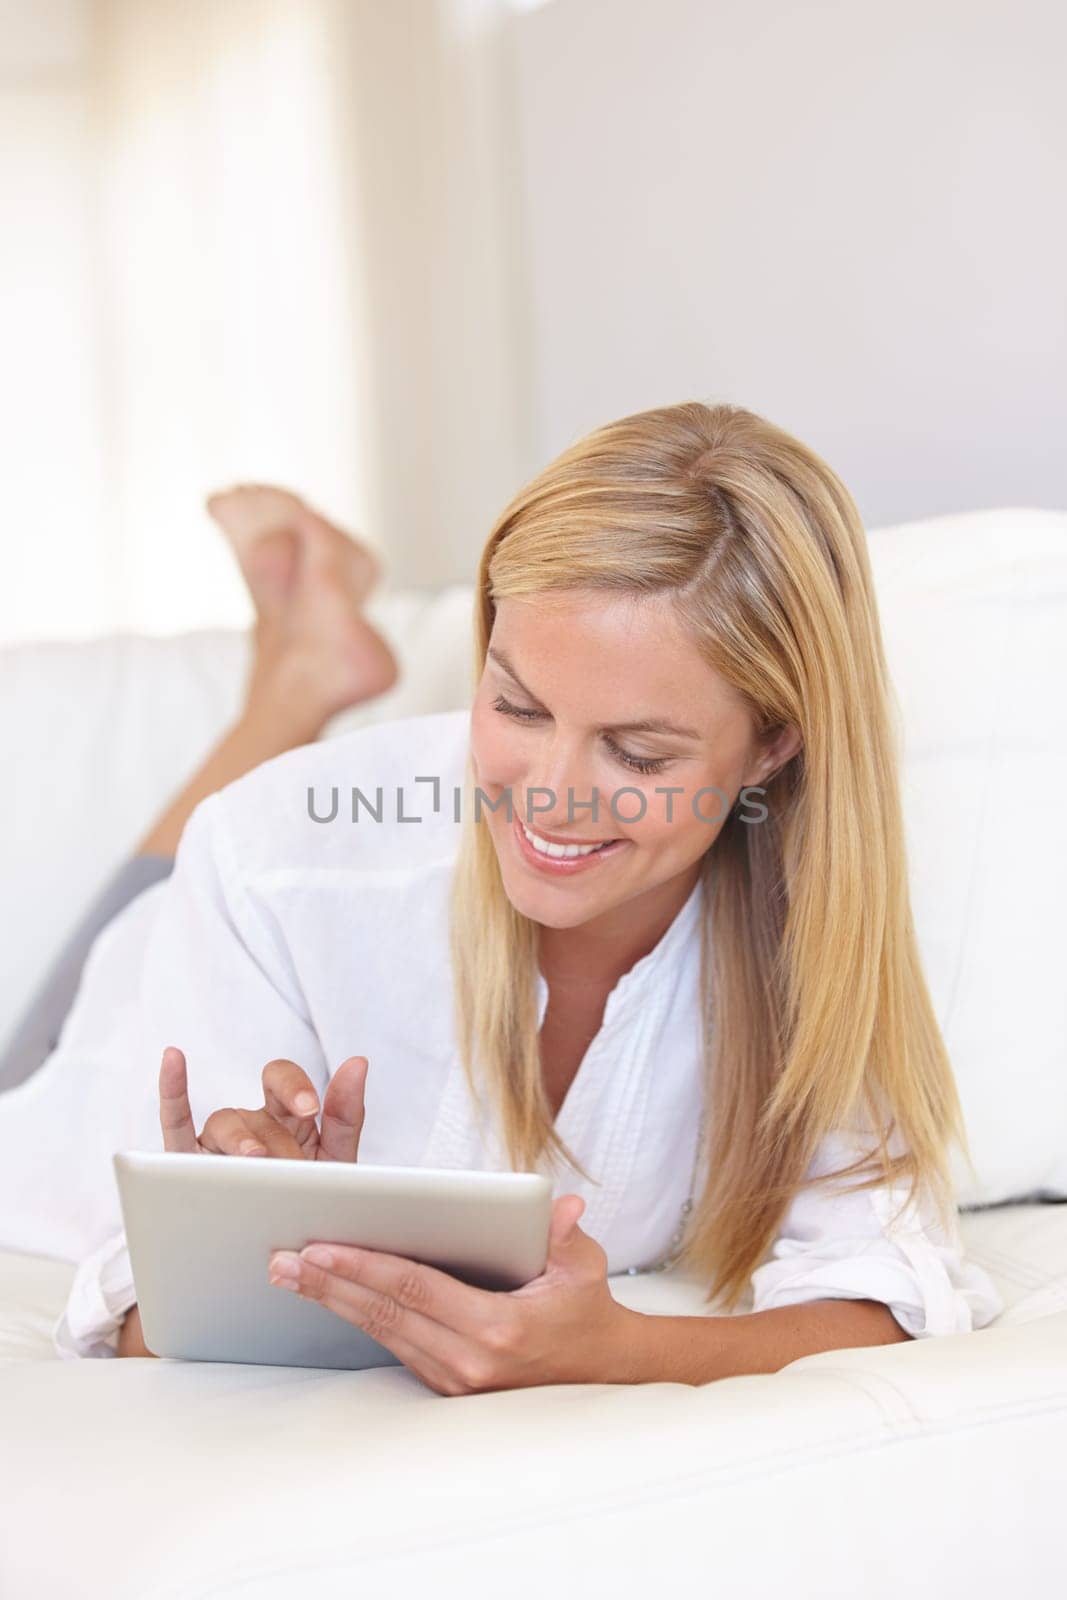 Home, bedroom and woman with a tablet, typing and communication with internet, social media and relax. Person, apartment and girl with technology, connection and digital app with a smile and network by YuriArcurs